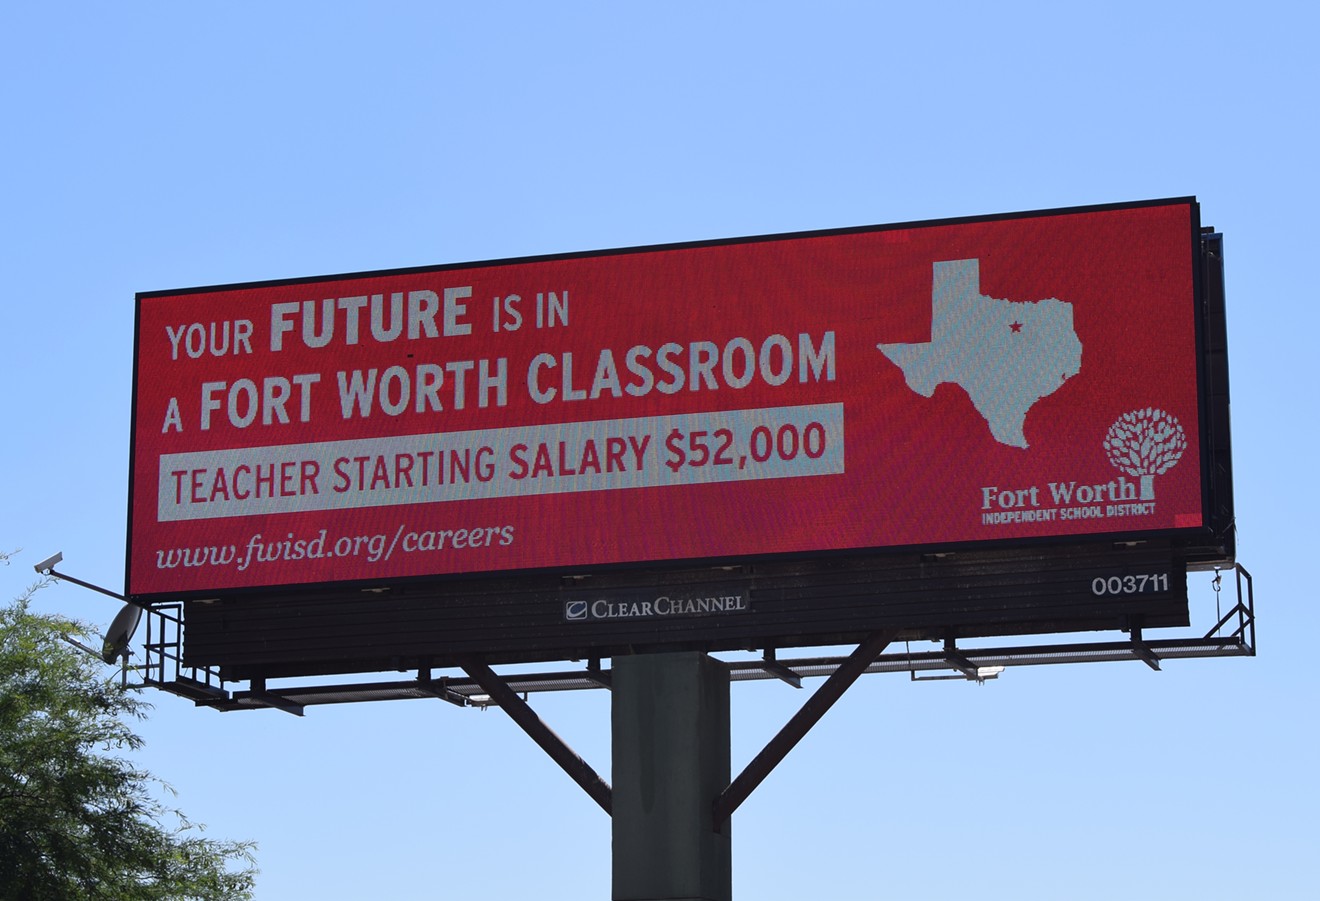 A billboard paid for by the the Fort Worth Independent School District near the corner of Indian School Road and 20th Street in Phoenix.